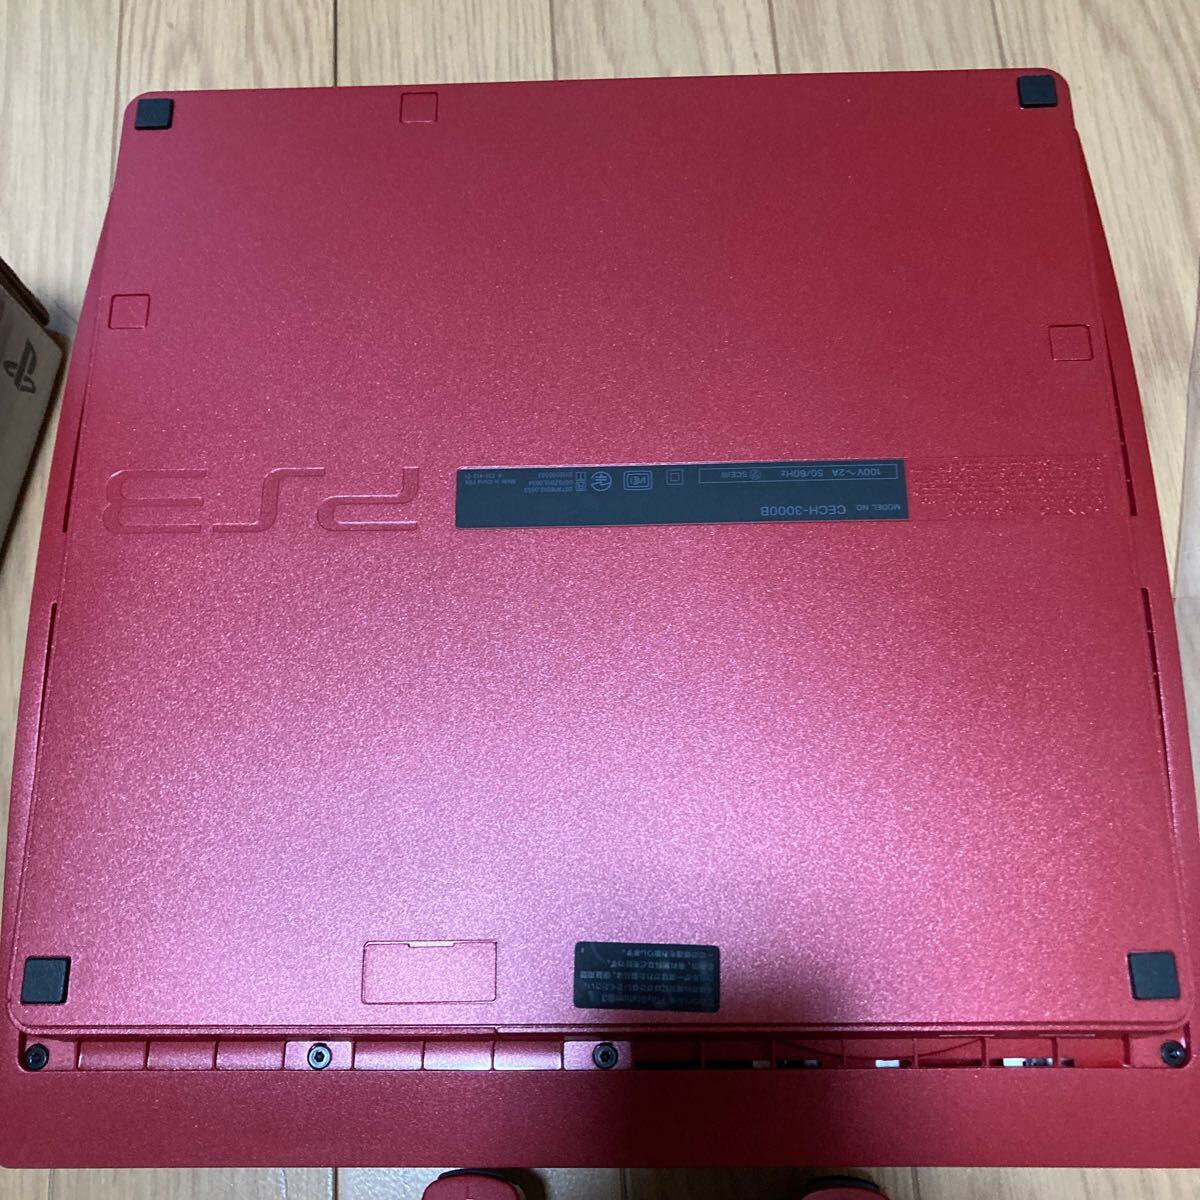 PS3 body CECH-3000BSR scarlet red 